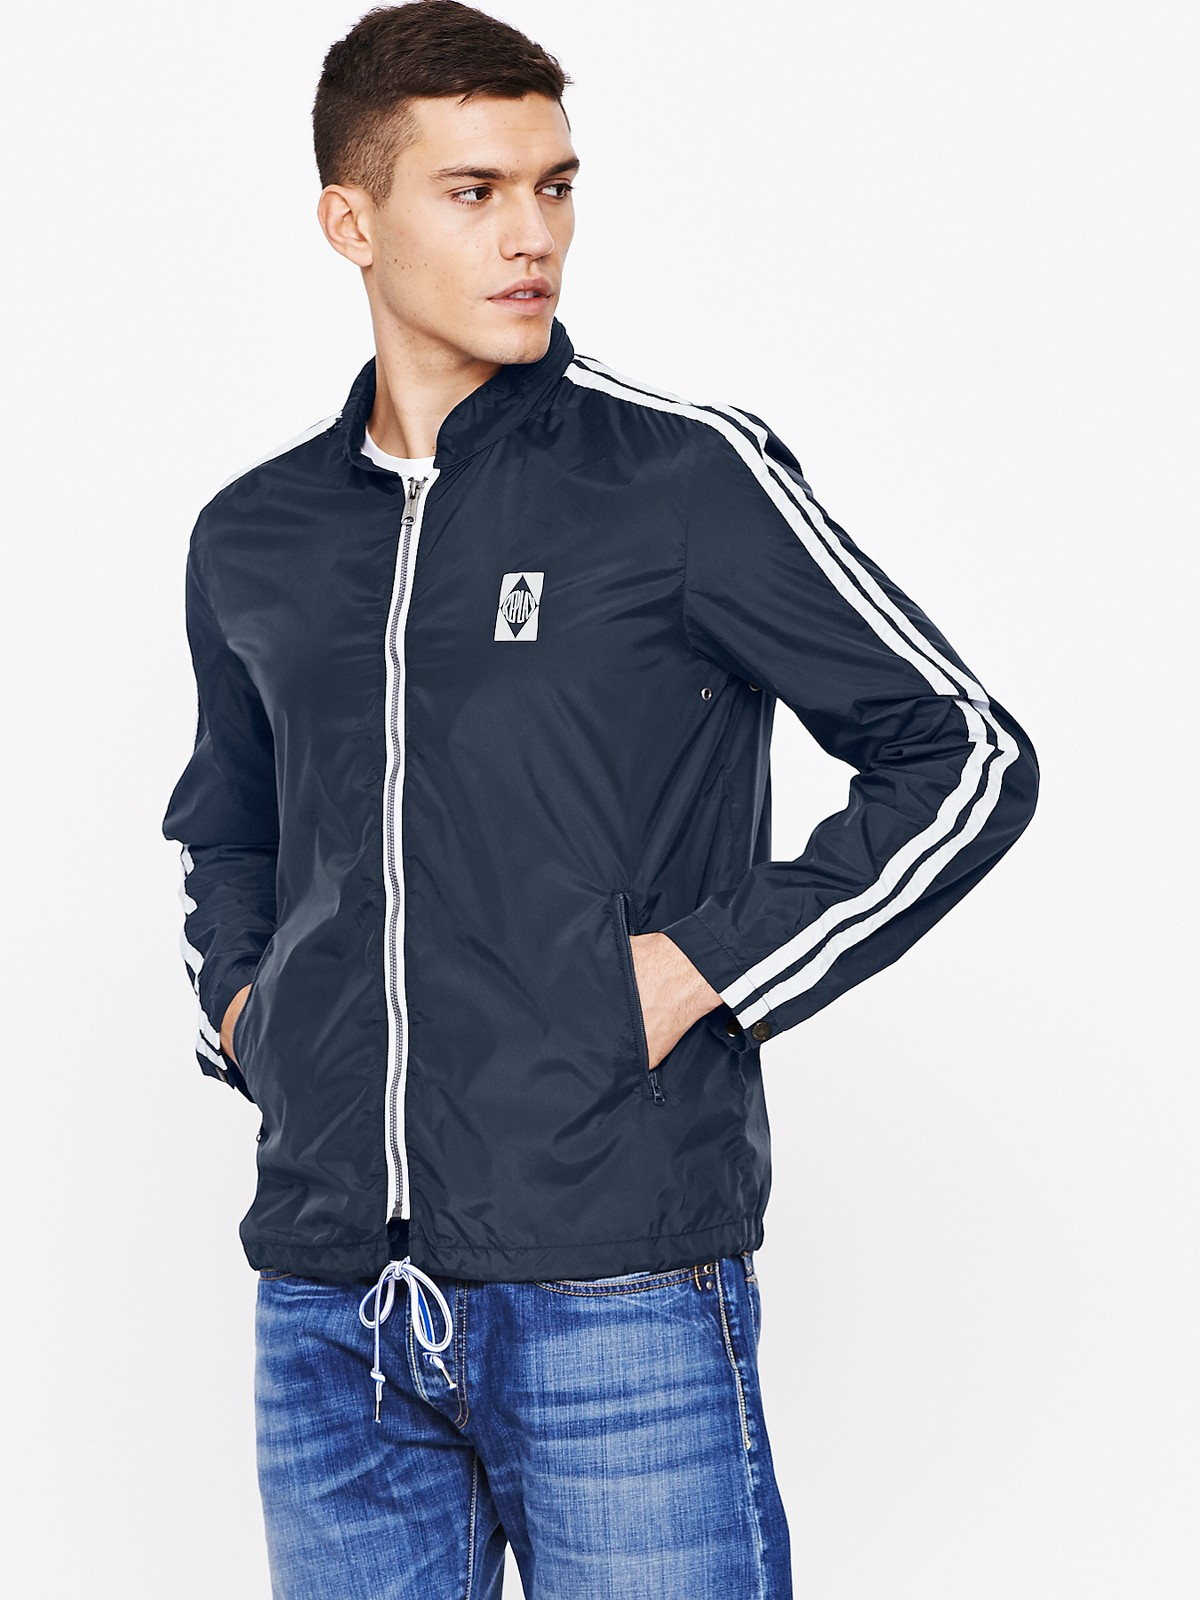 Replay Replay Mens Nylon Jacket in Blue for Men (navy) | Lyst